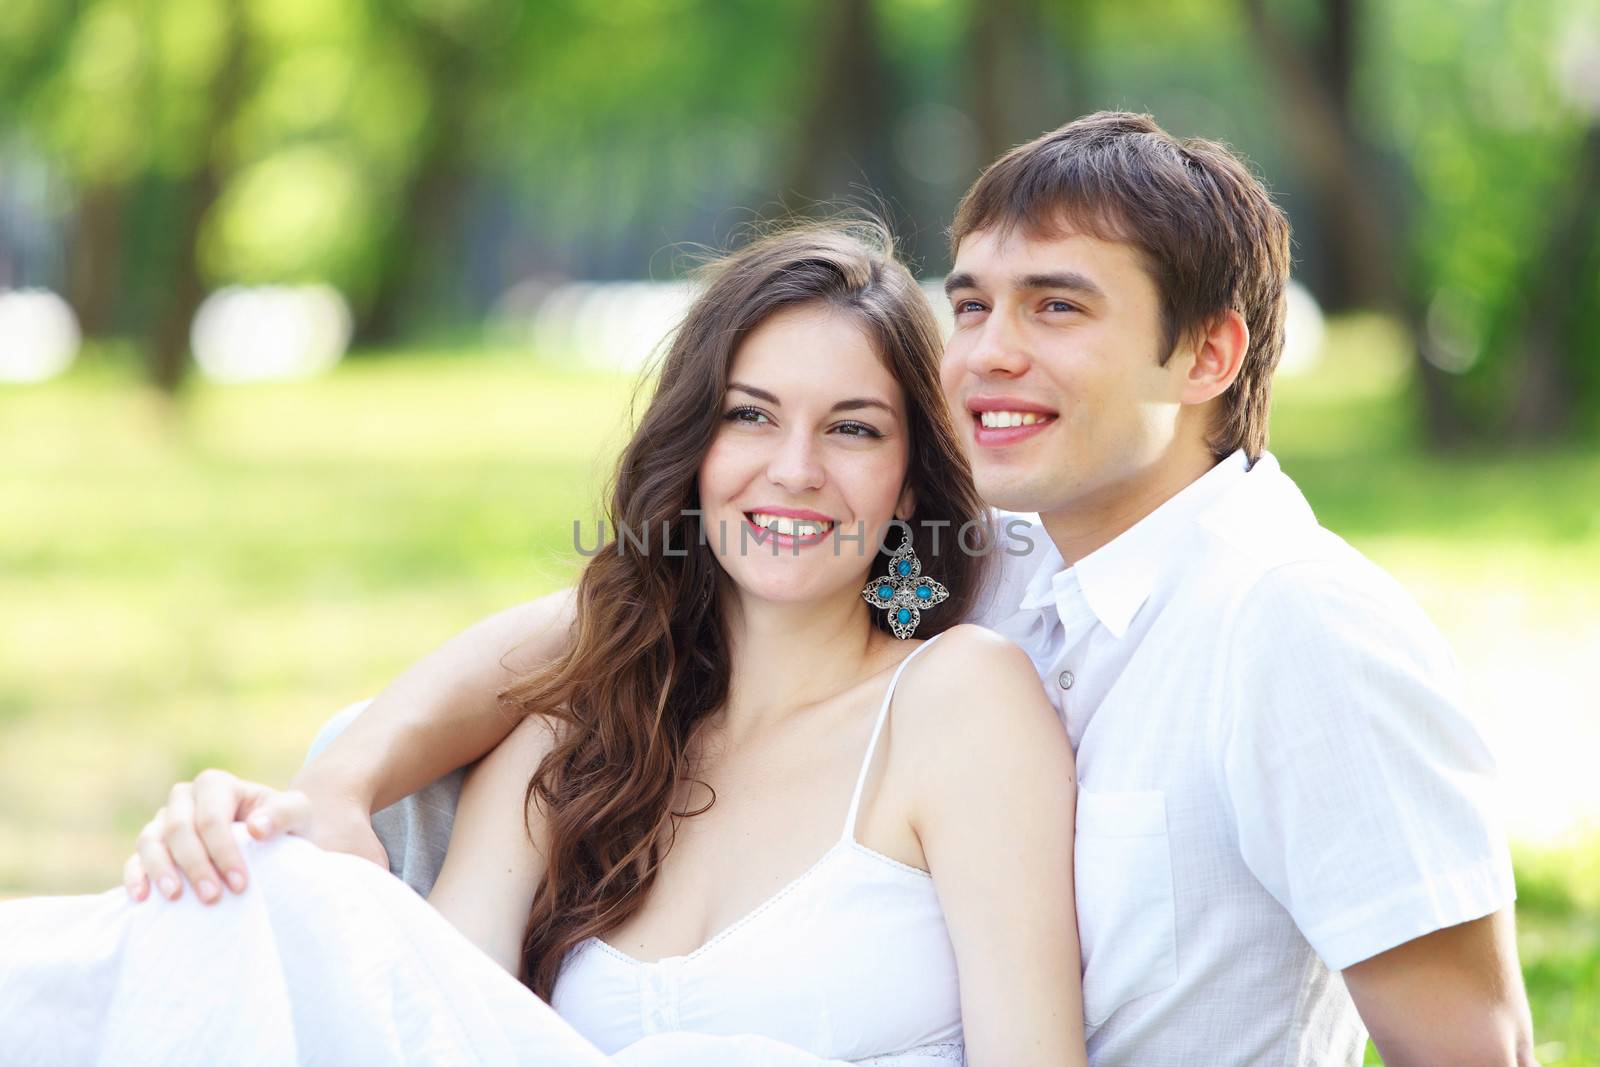 Portrait of a young romantic couple embracing each other